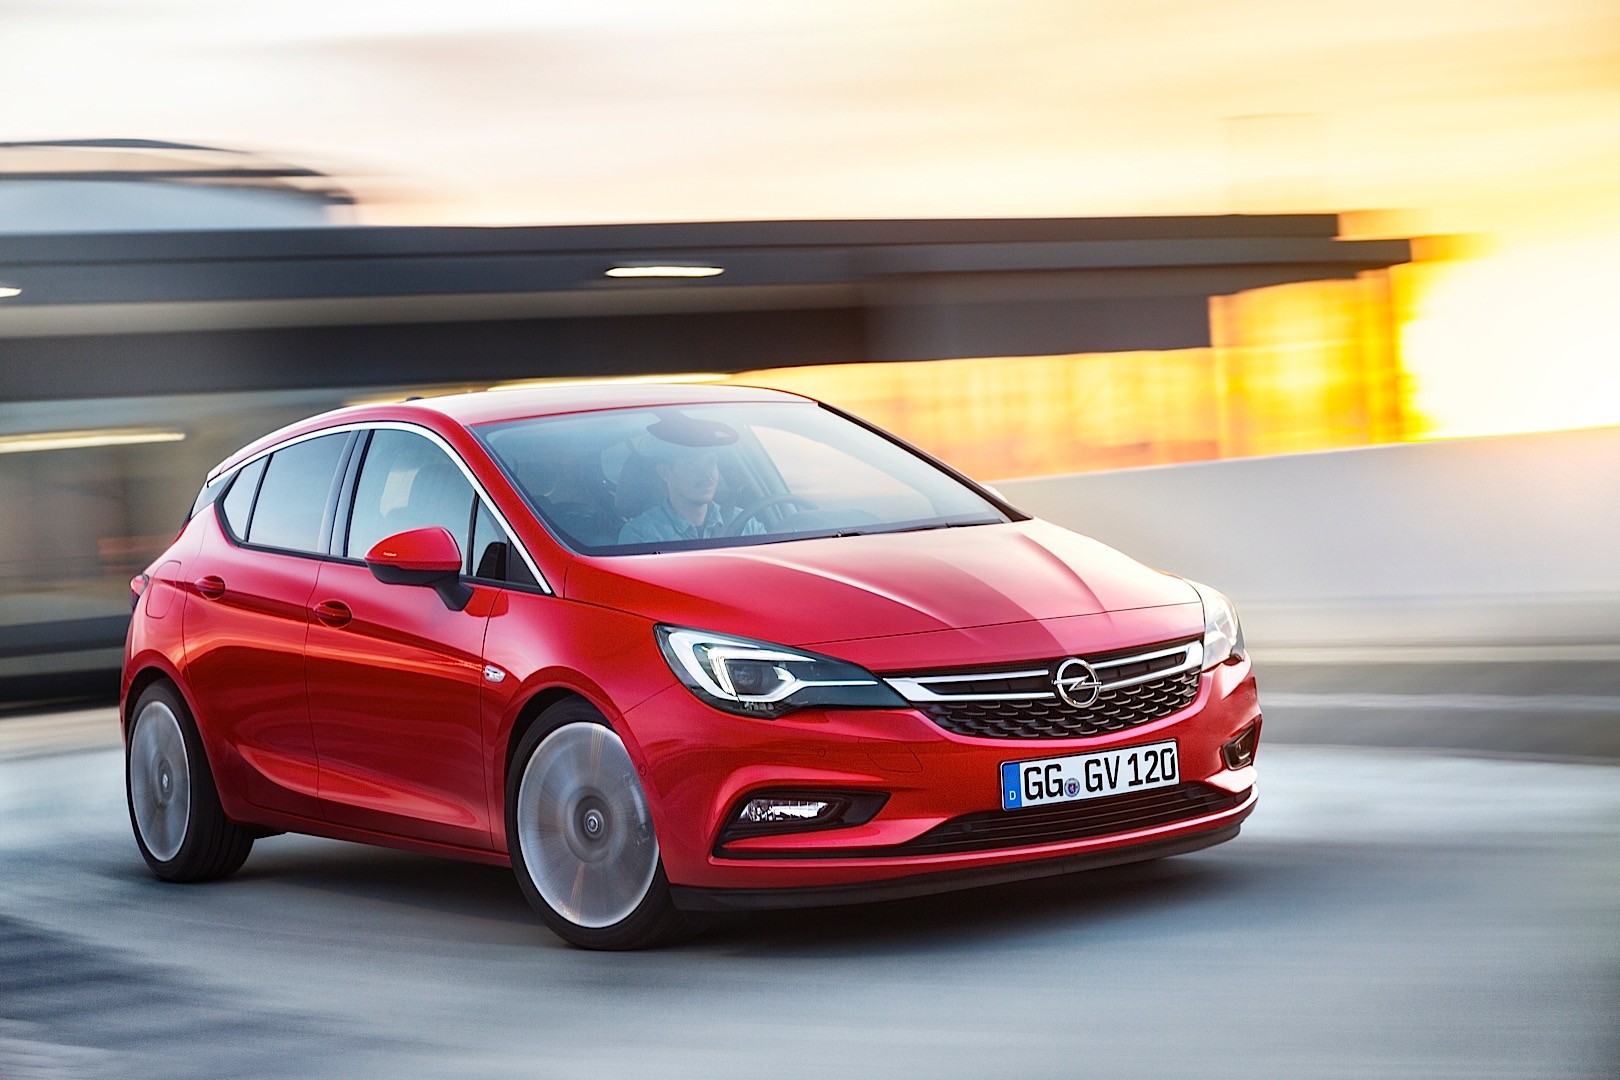 https://s1.cdn.autoevolution.com/images/news/gallery/2015-opel-astra-k-is-here-to-stay-photo-gallery_9.jpg